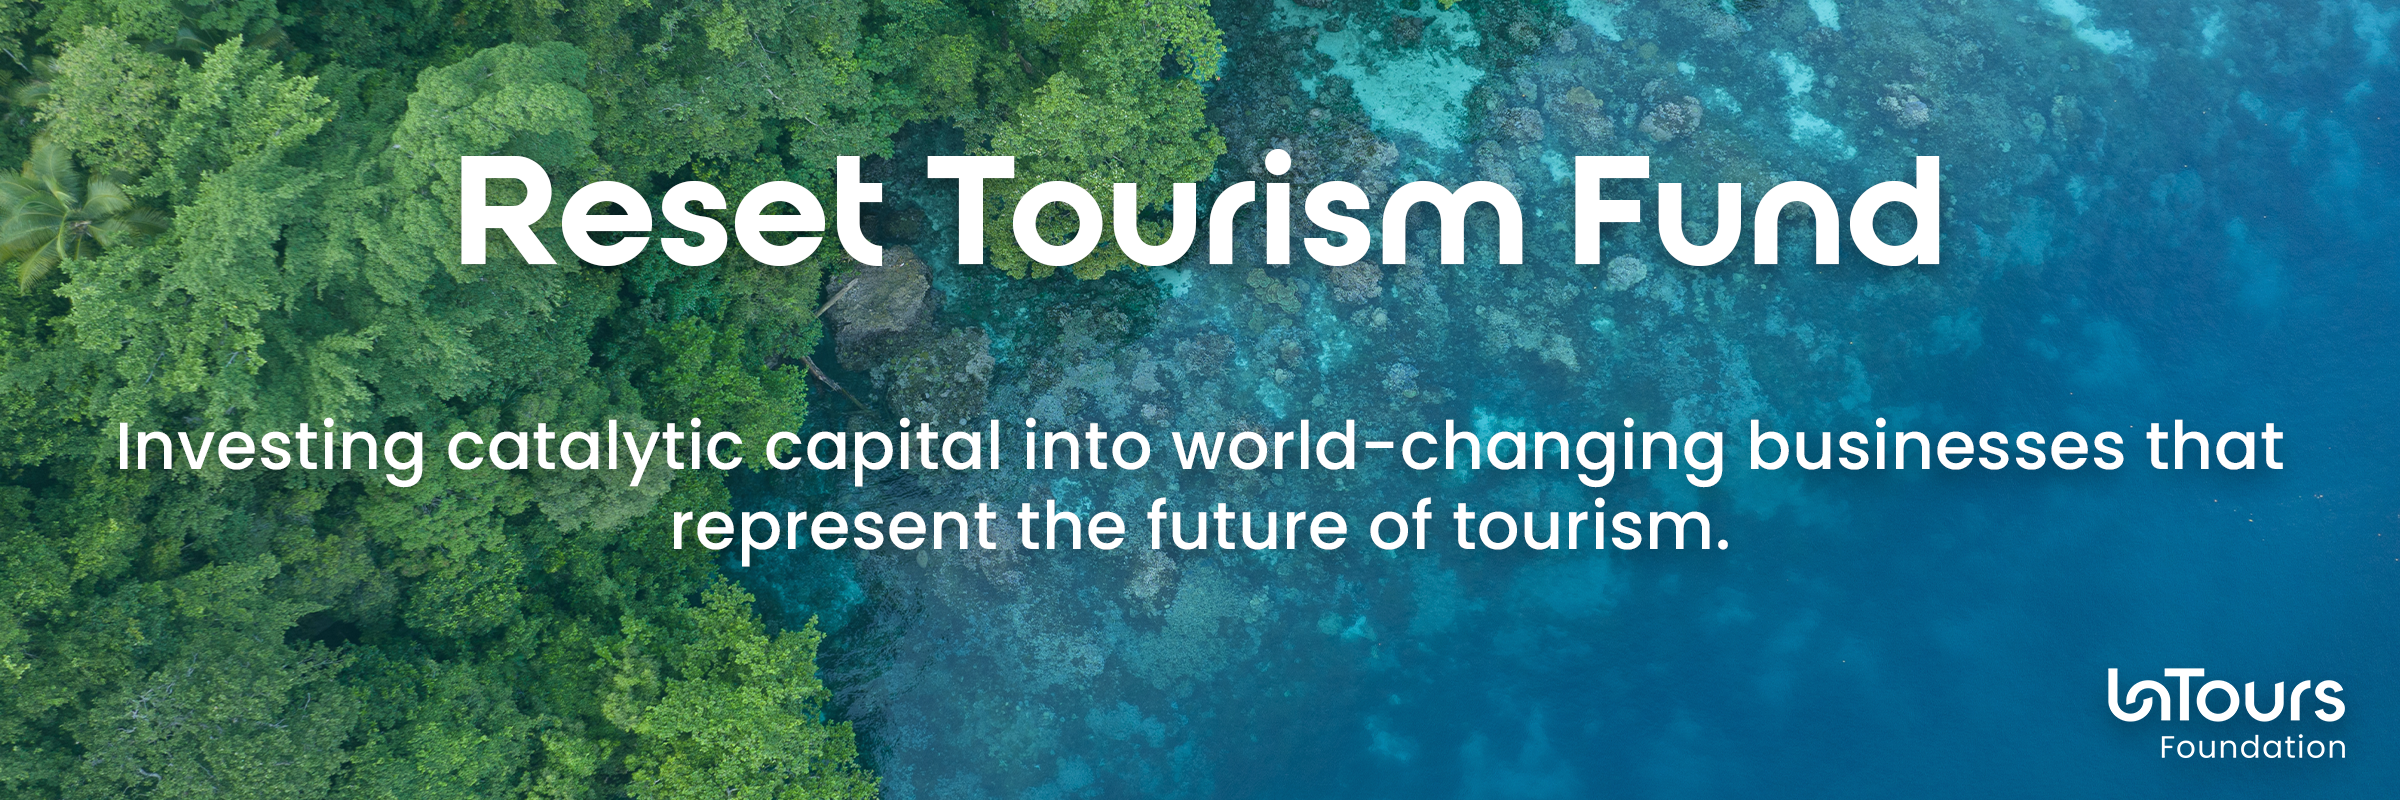 Reset Tourism Fund: The Reset Tourism Fund invests catalytic capital into world-changing businesses that represent the future of tourism.